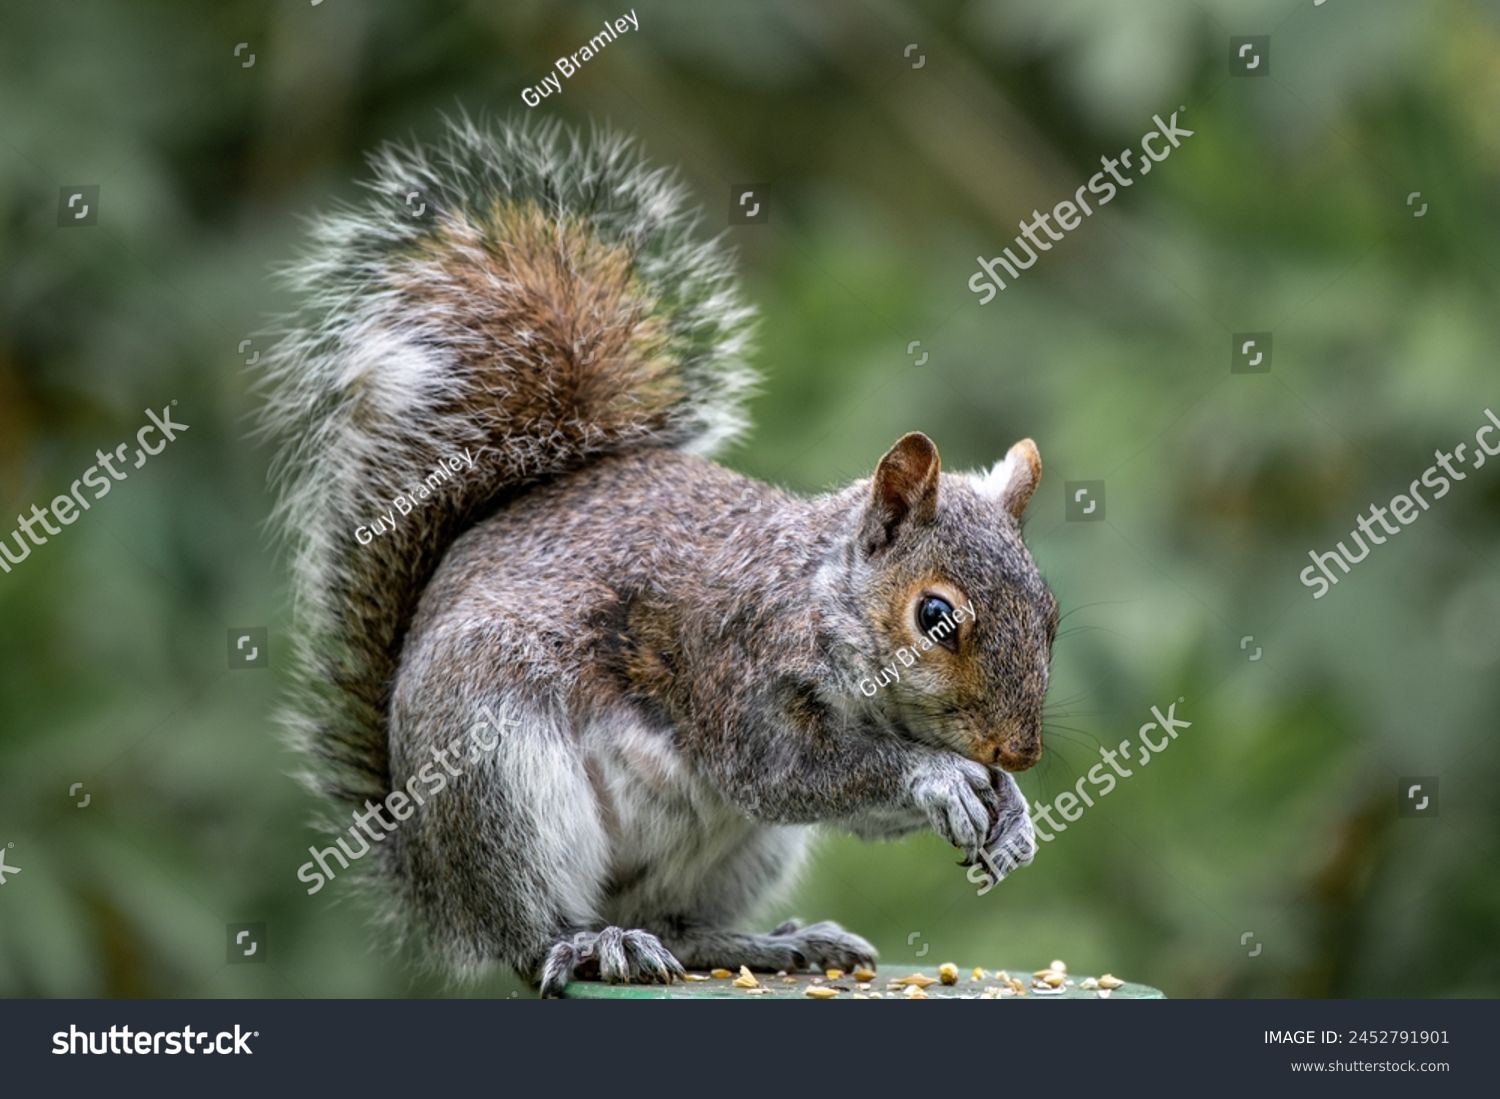 Bushy tailed squirrel eating nuts, Attenborough Nature reserve #2452791901